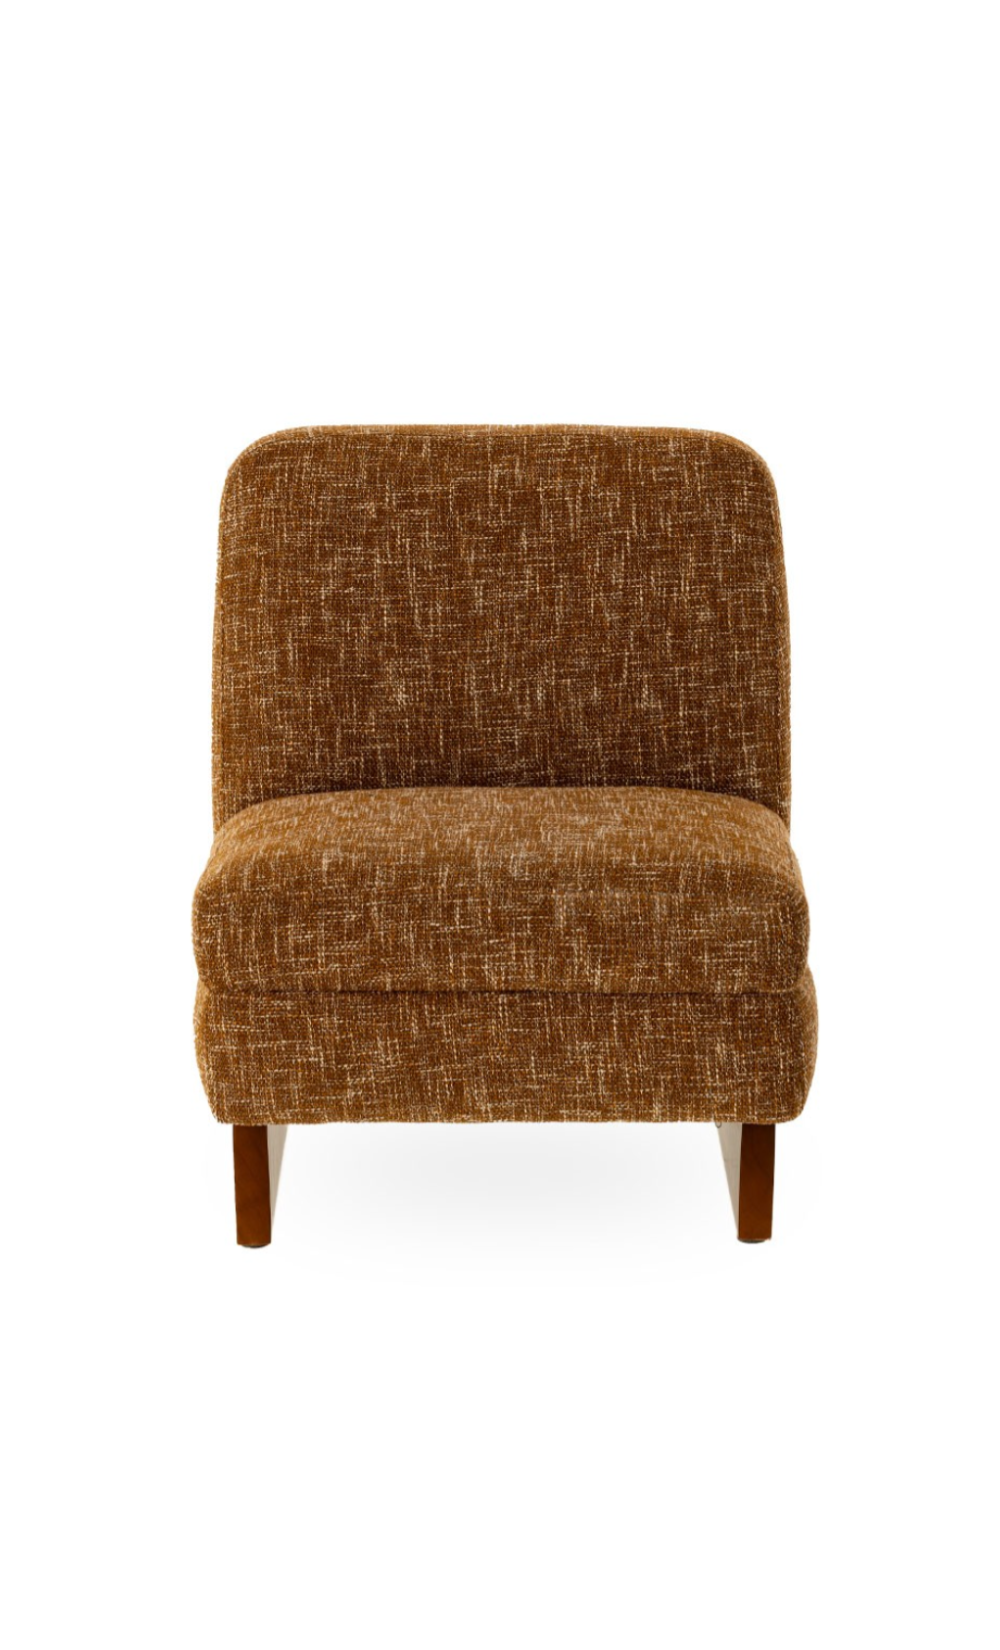 trinity-fauteuil-camel-chiné-seventies